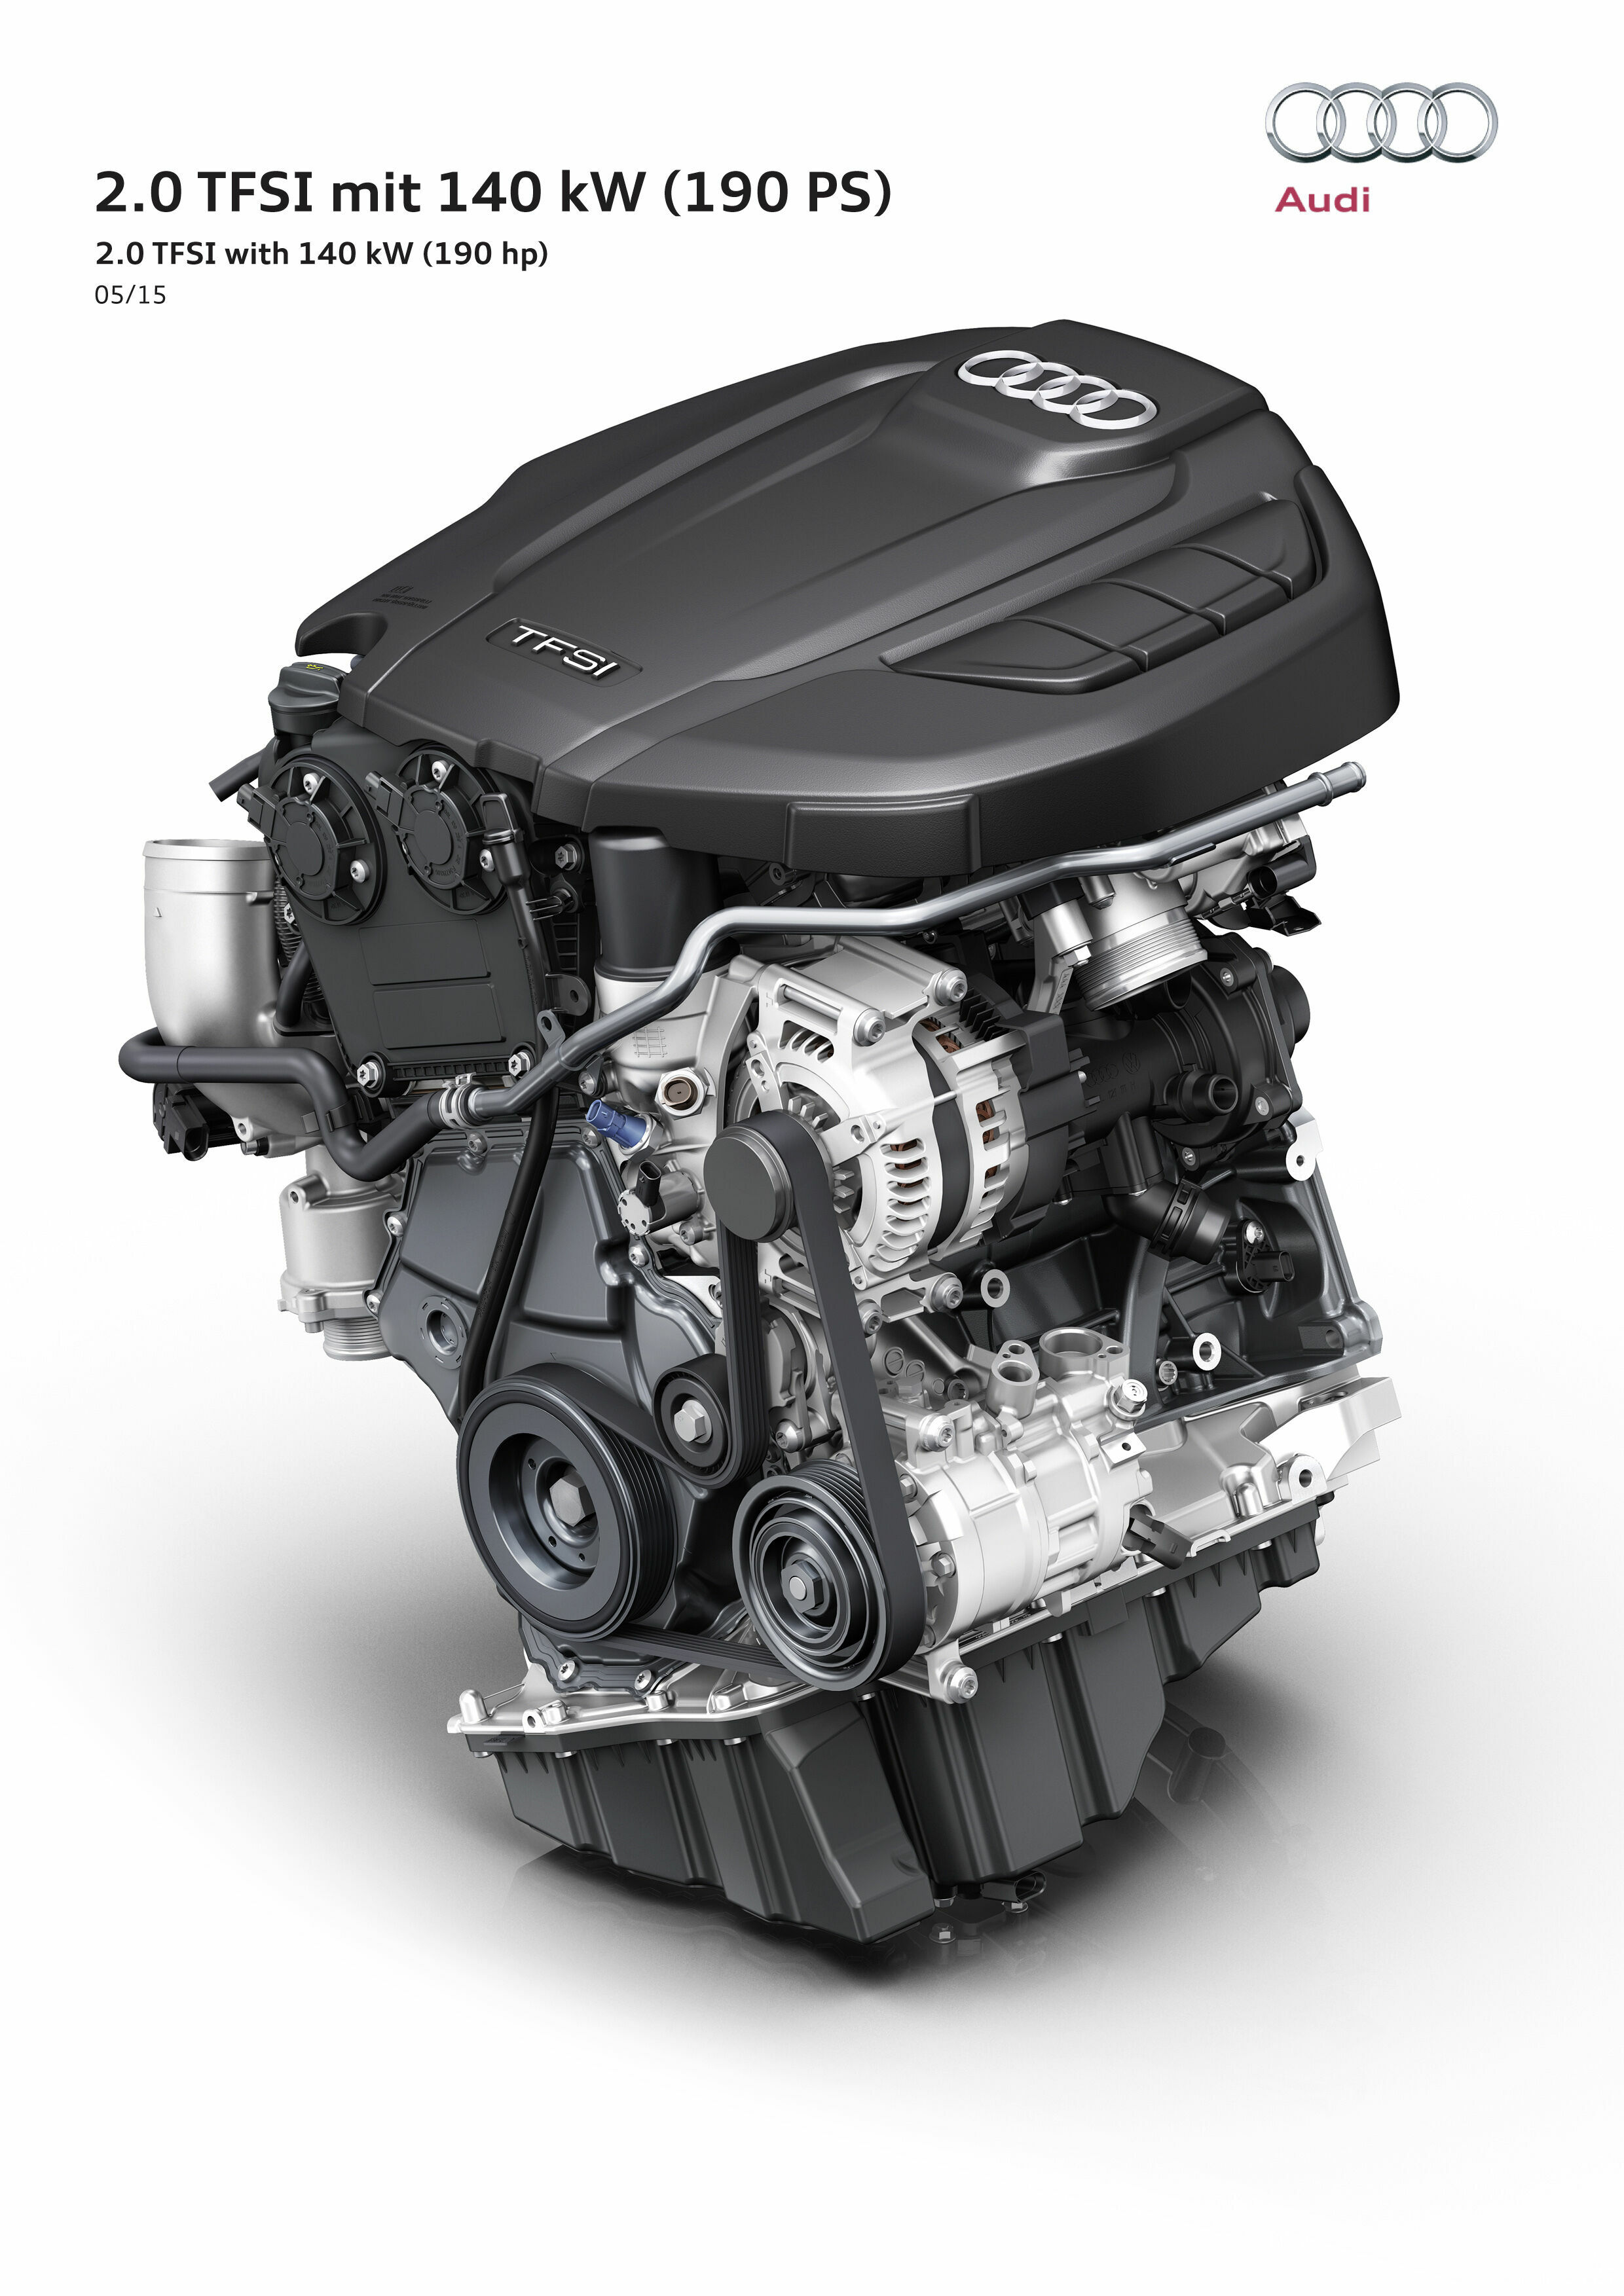 World premiere at the Vienna Motor Symposium: new high-efficiency engine from Audi